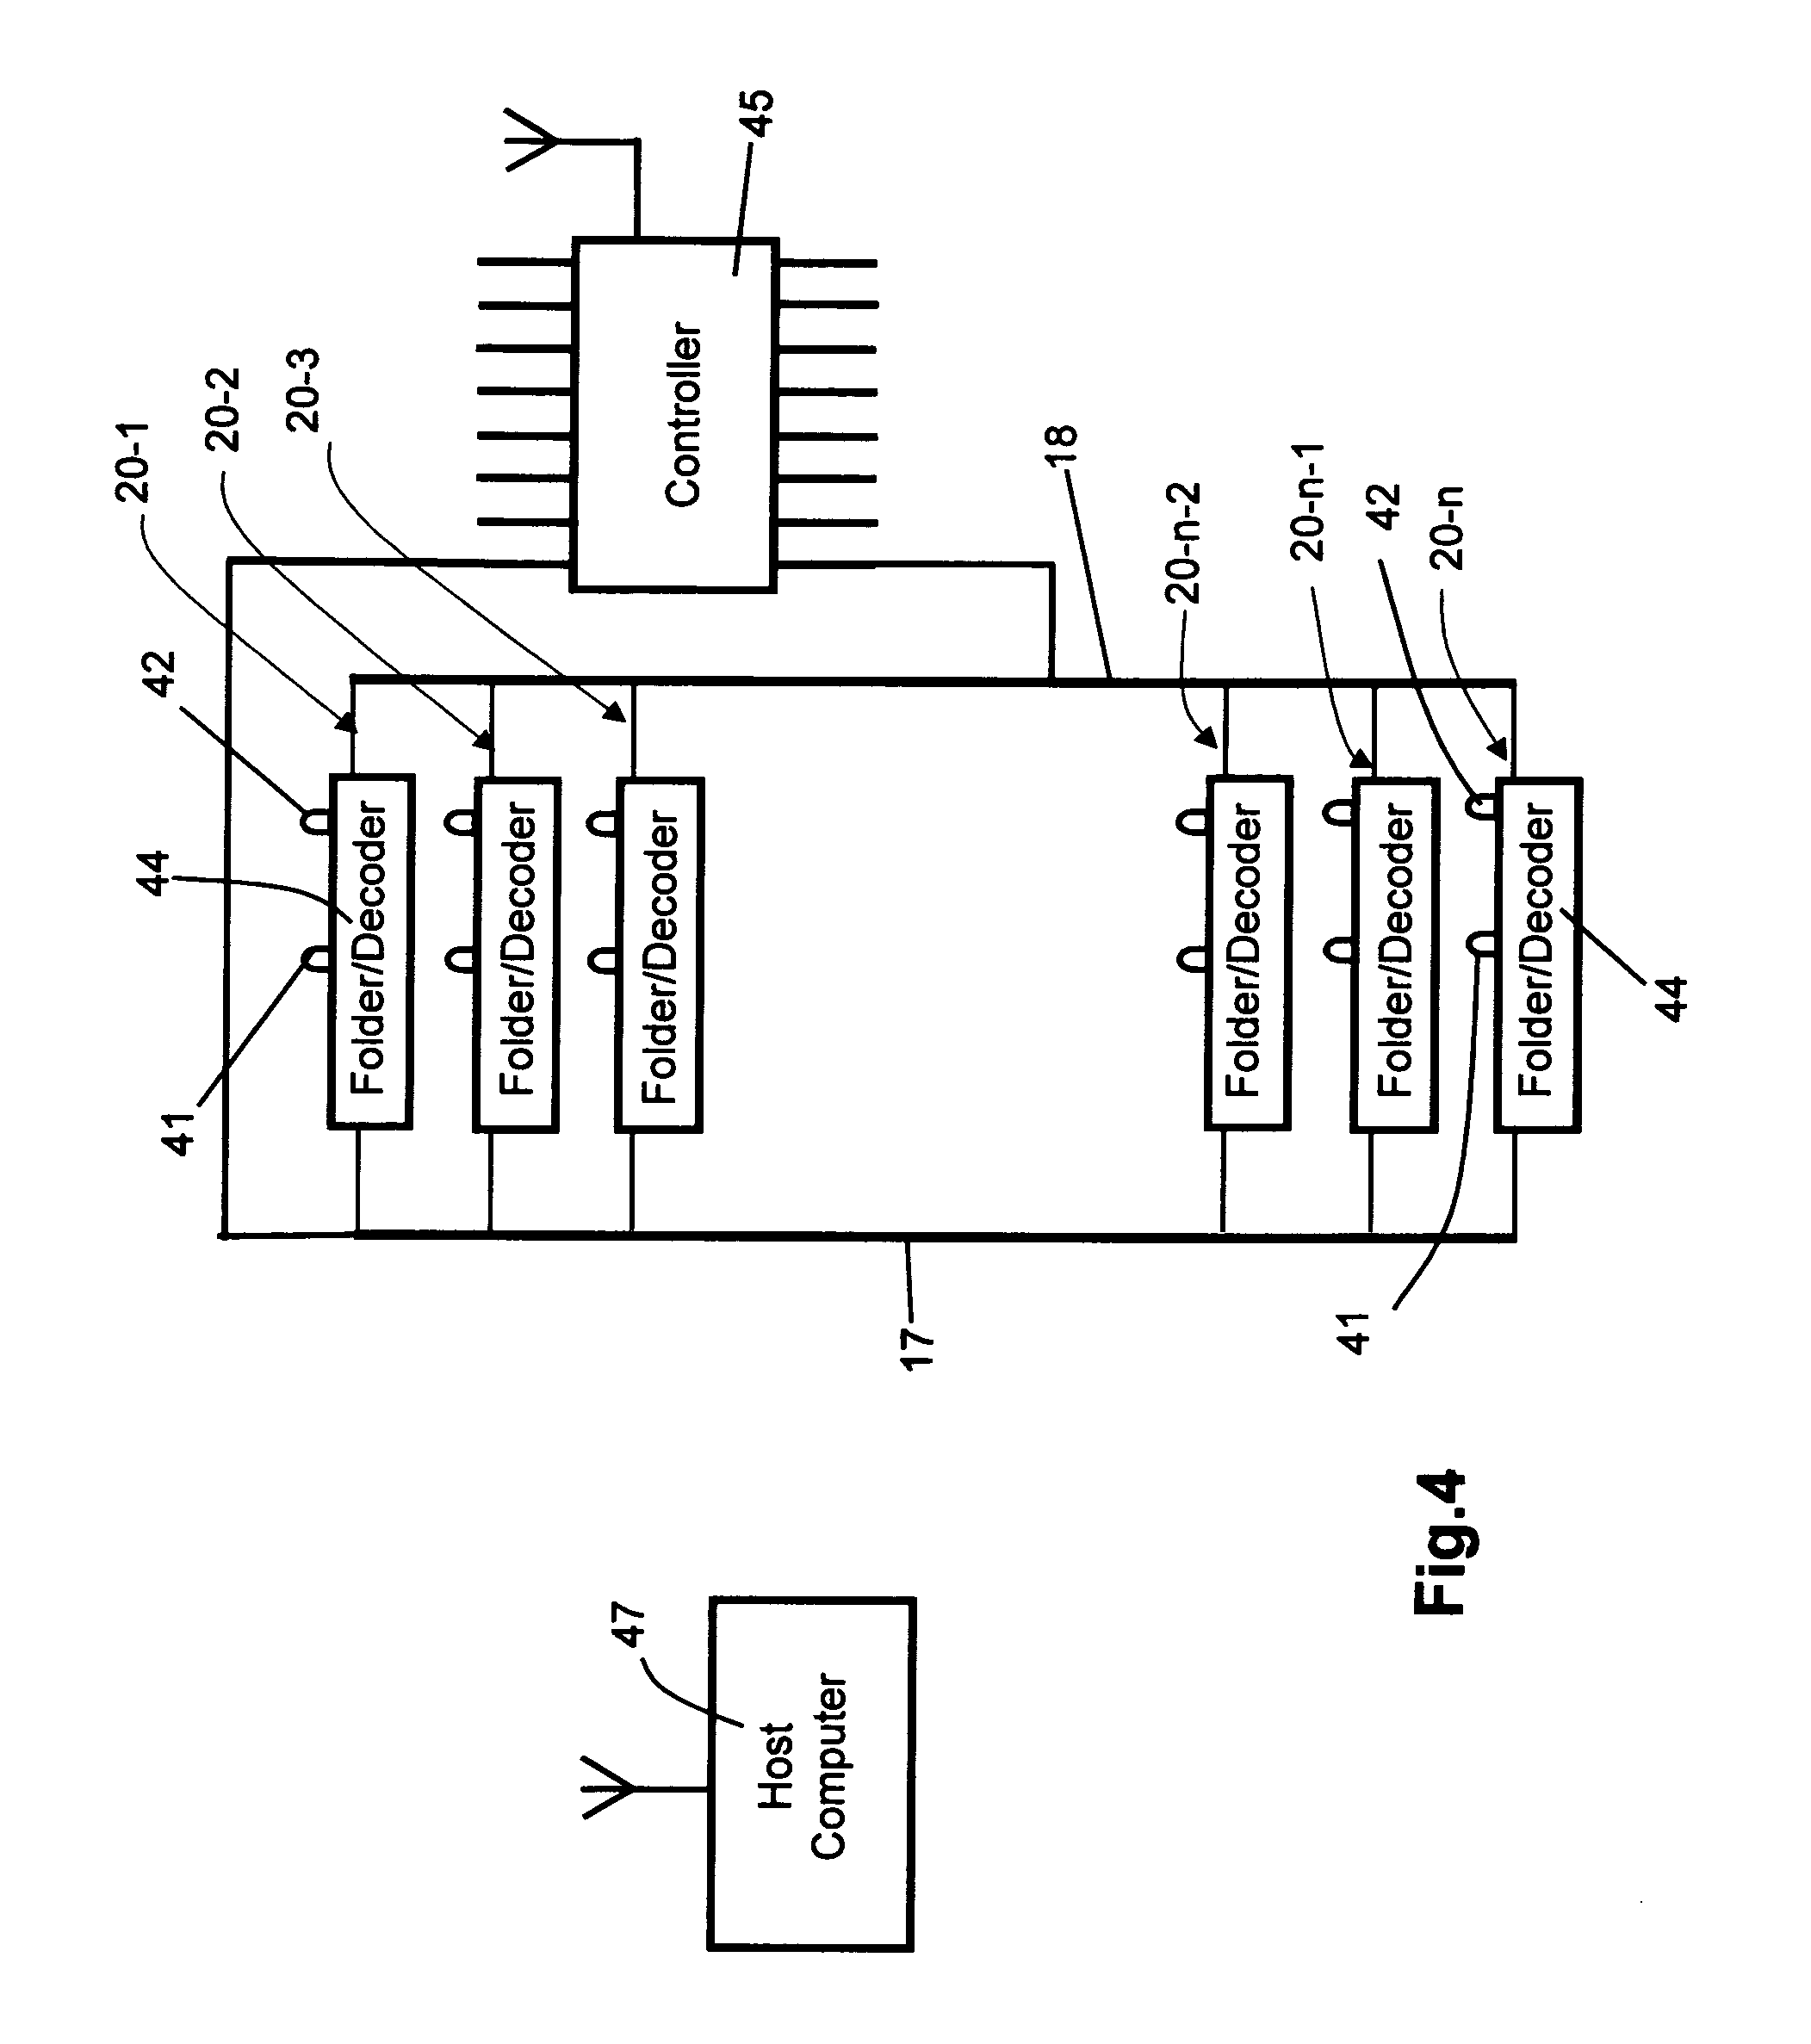 Storage container for electronically addressable file folders and documents